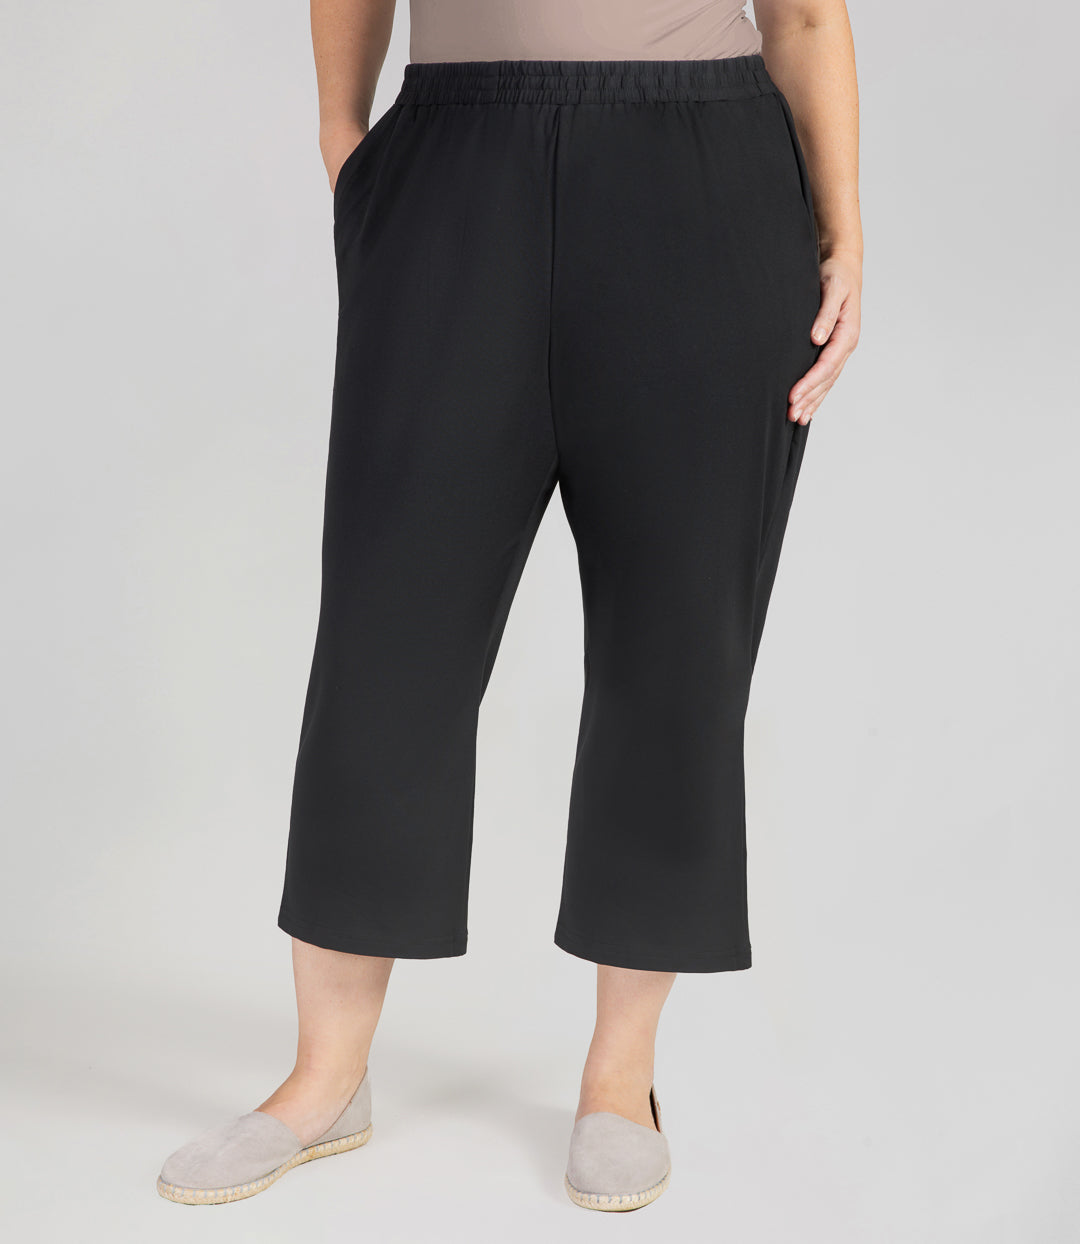 Front view, bottom half of plus sized woman, wearing JunoActives SoftWik Relaxed Fit Long Capris with Pockets in black. Hemline ends at mid-calf of model.